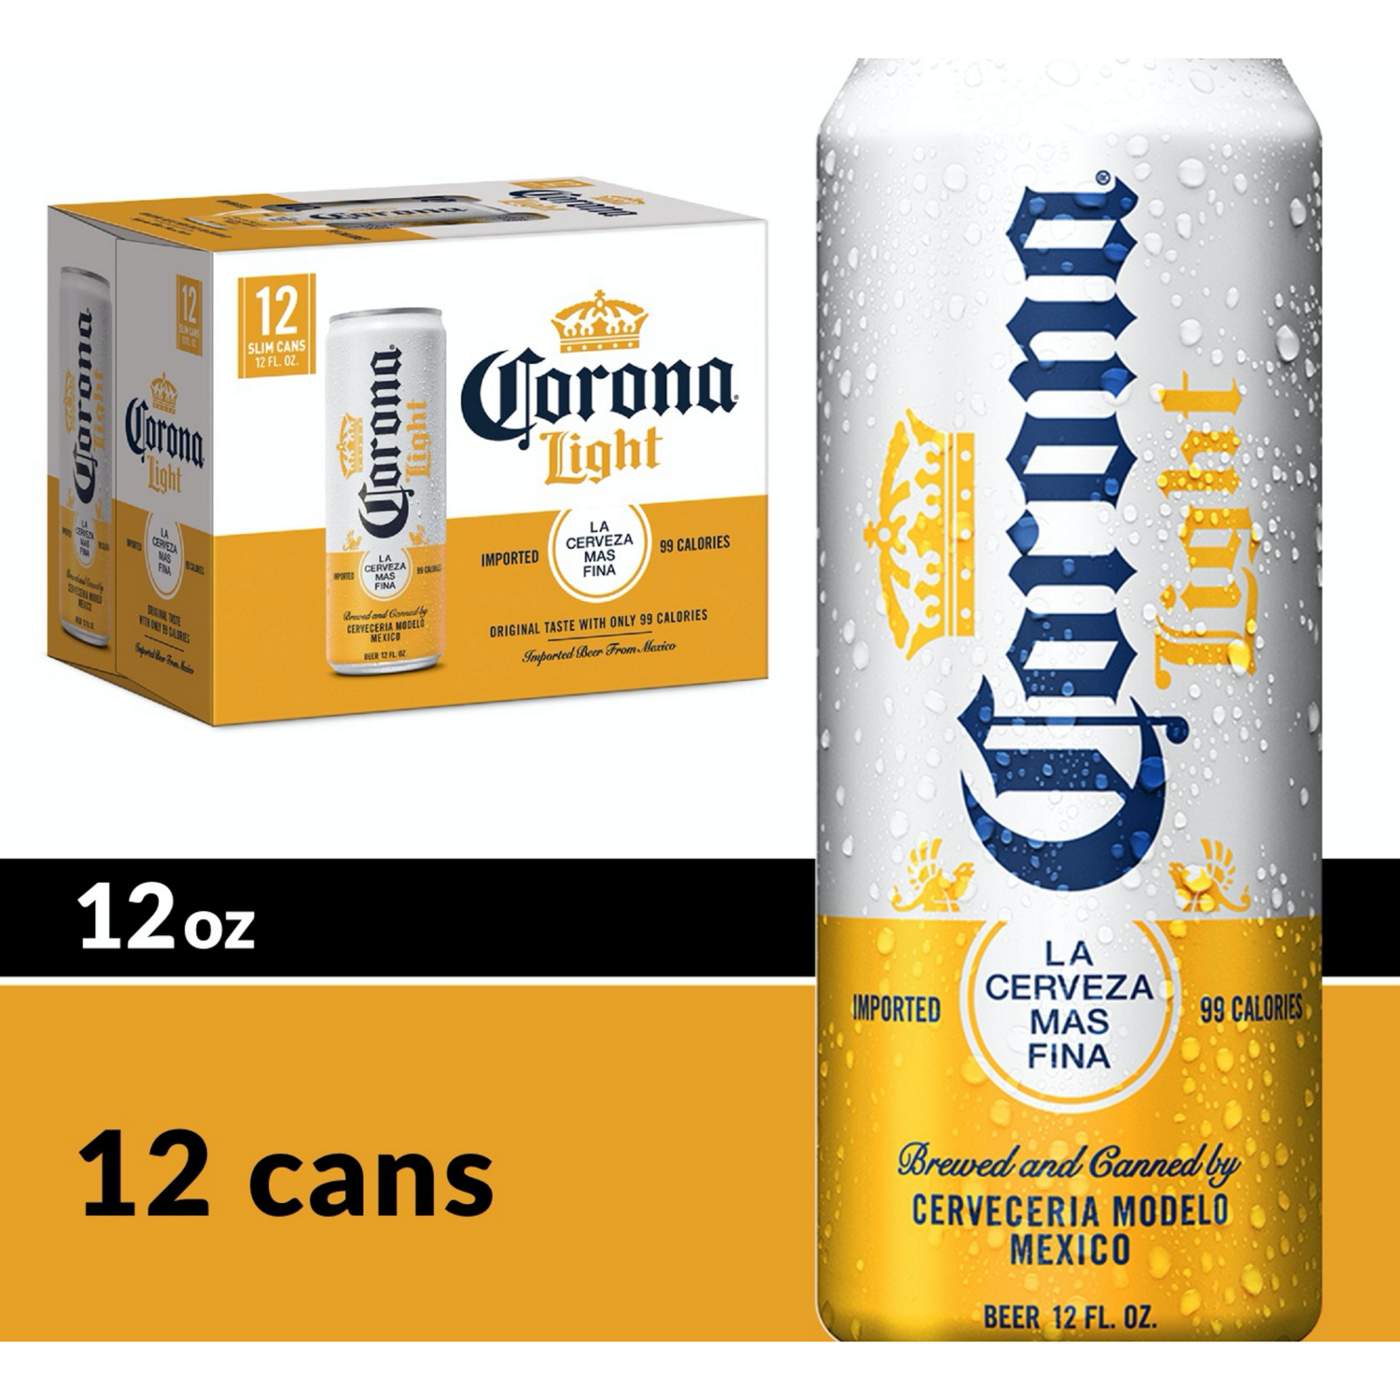 Corona Light Mexican Lager Import Light Beer 12 oz Cans, 12 pk; image 3 of 10